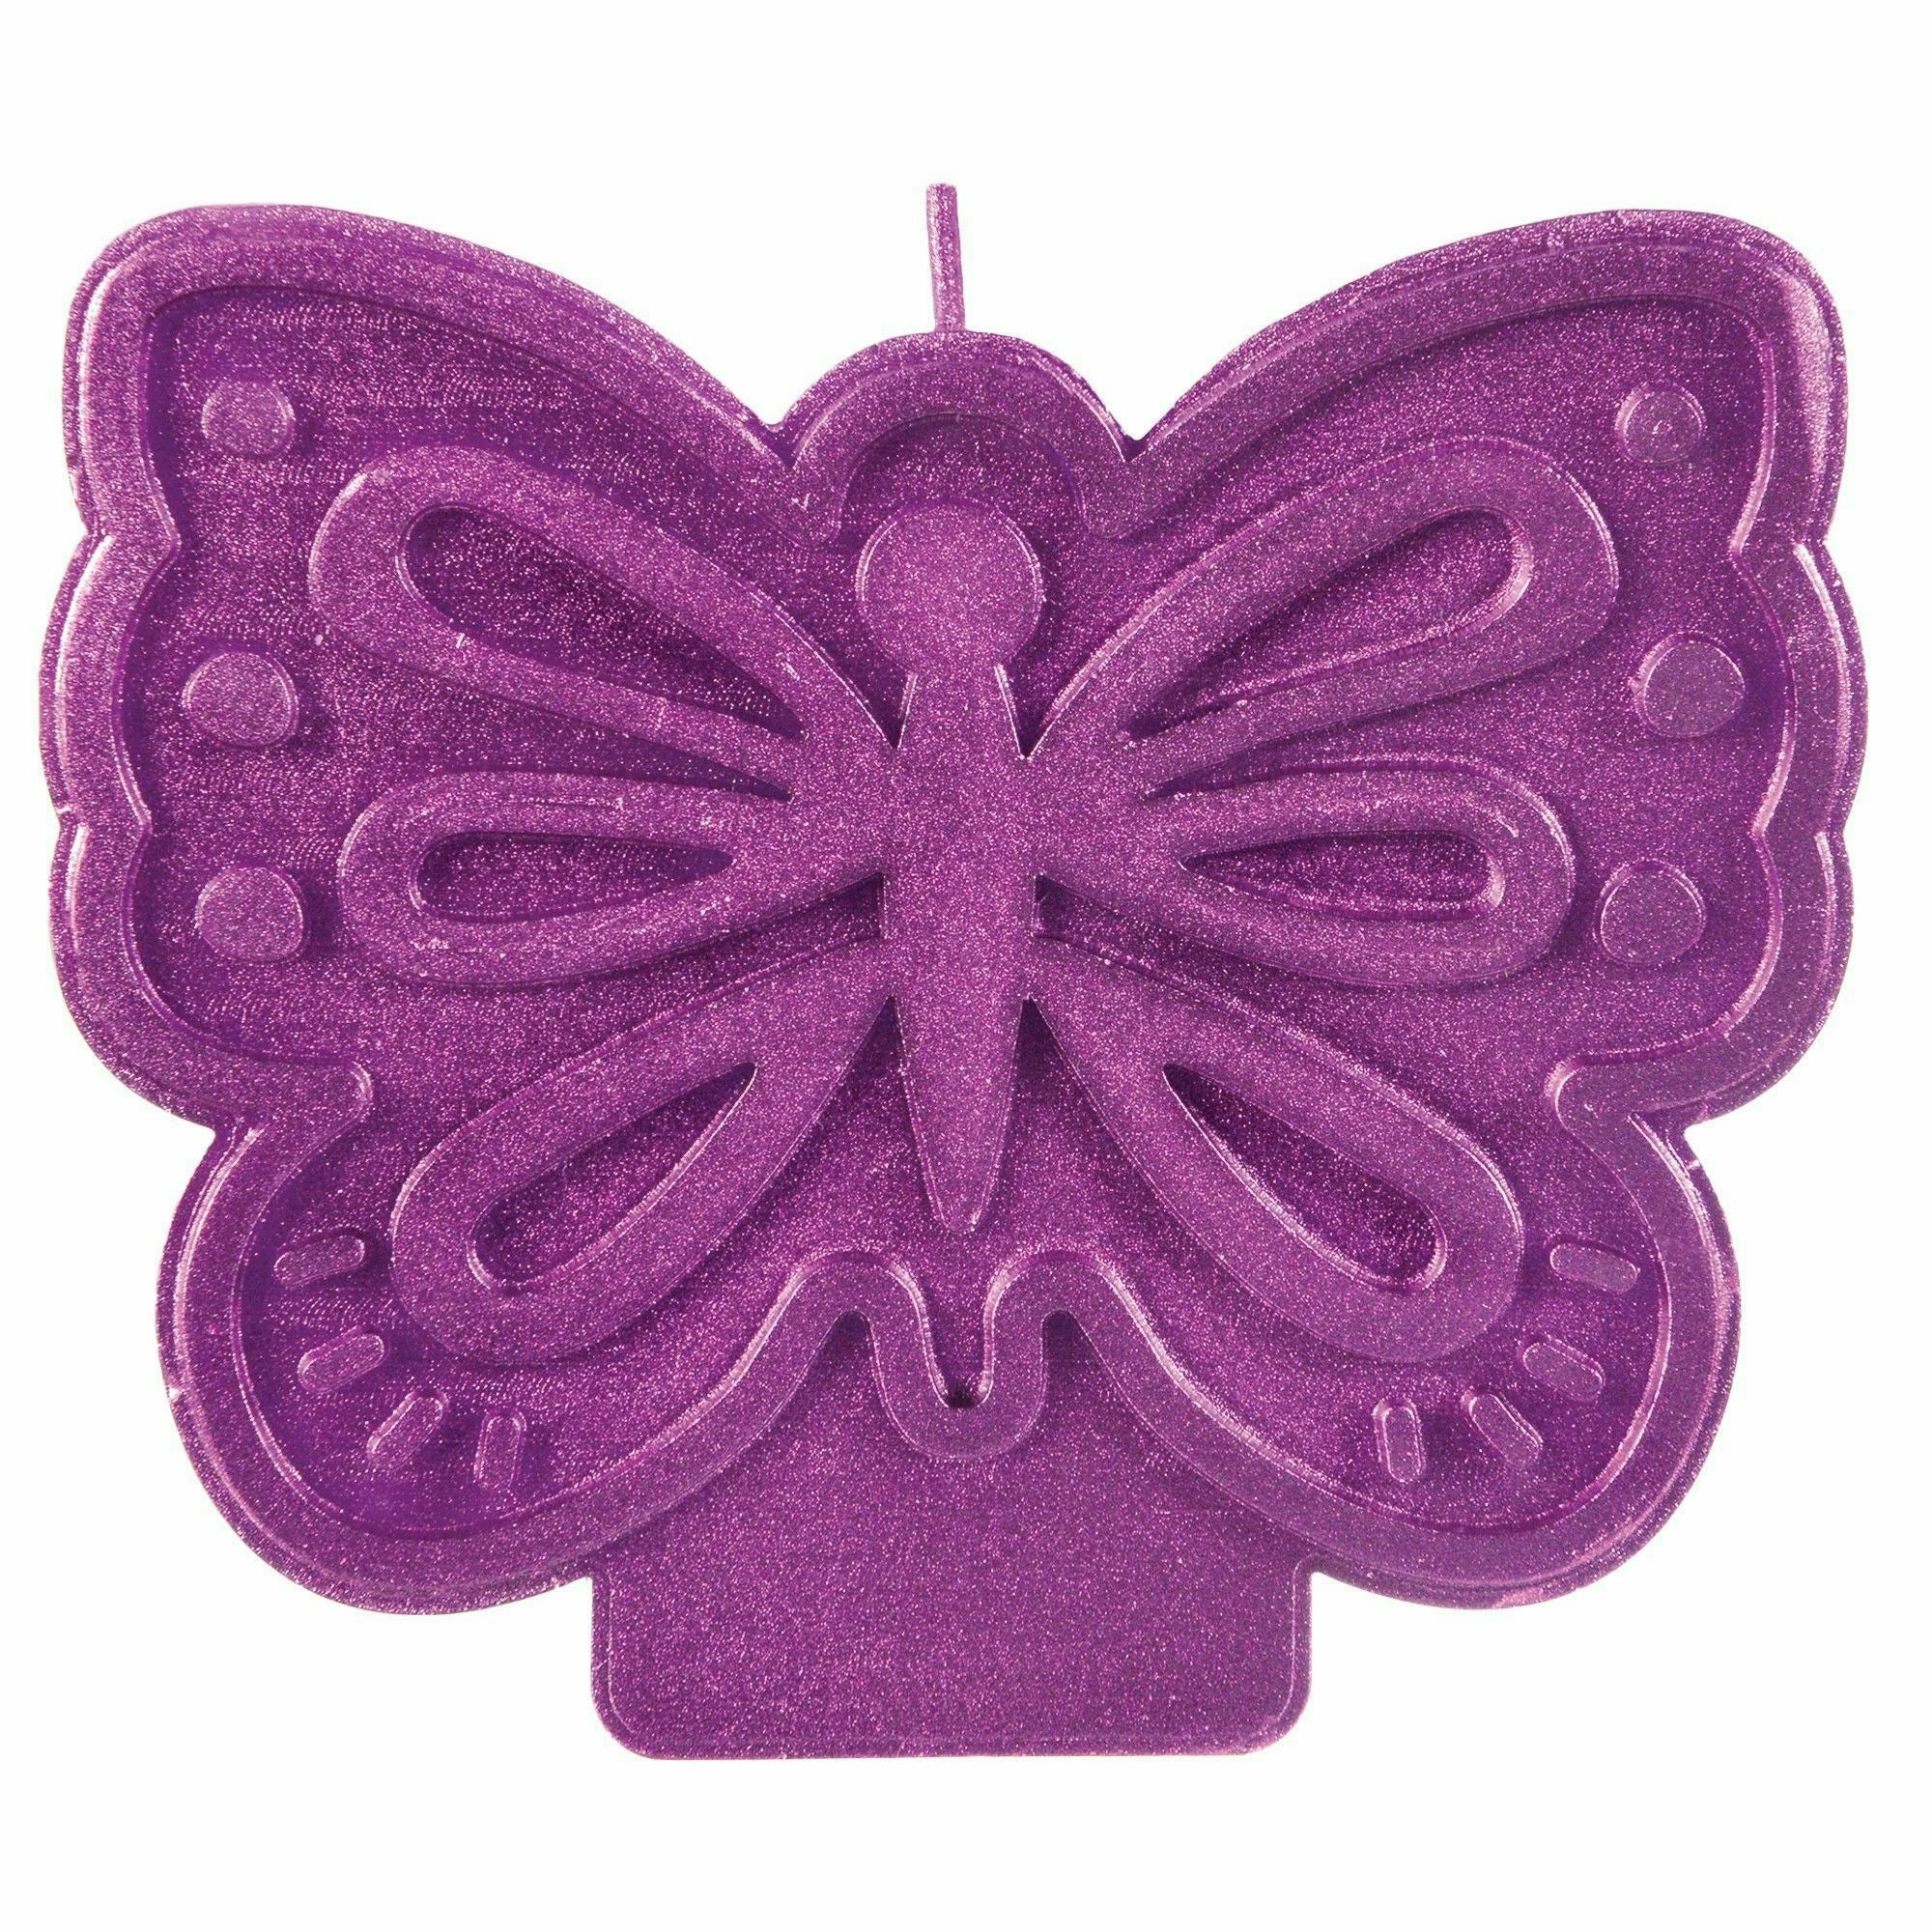 Amscan CANDLES Flutter Candle